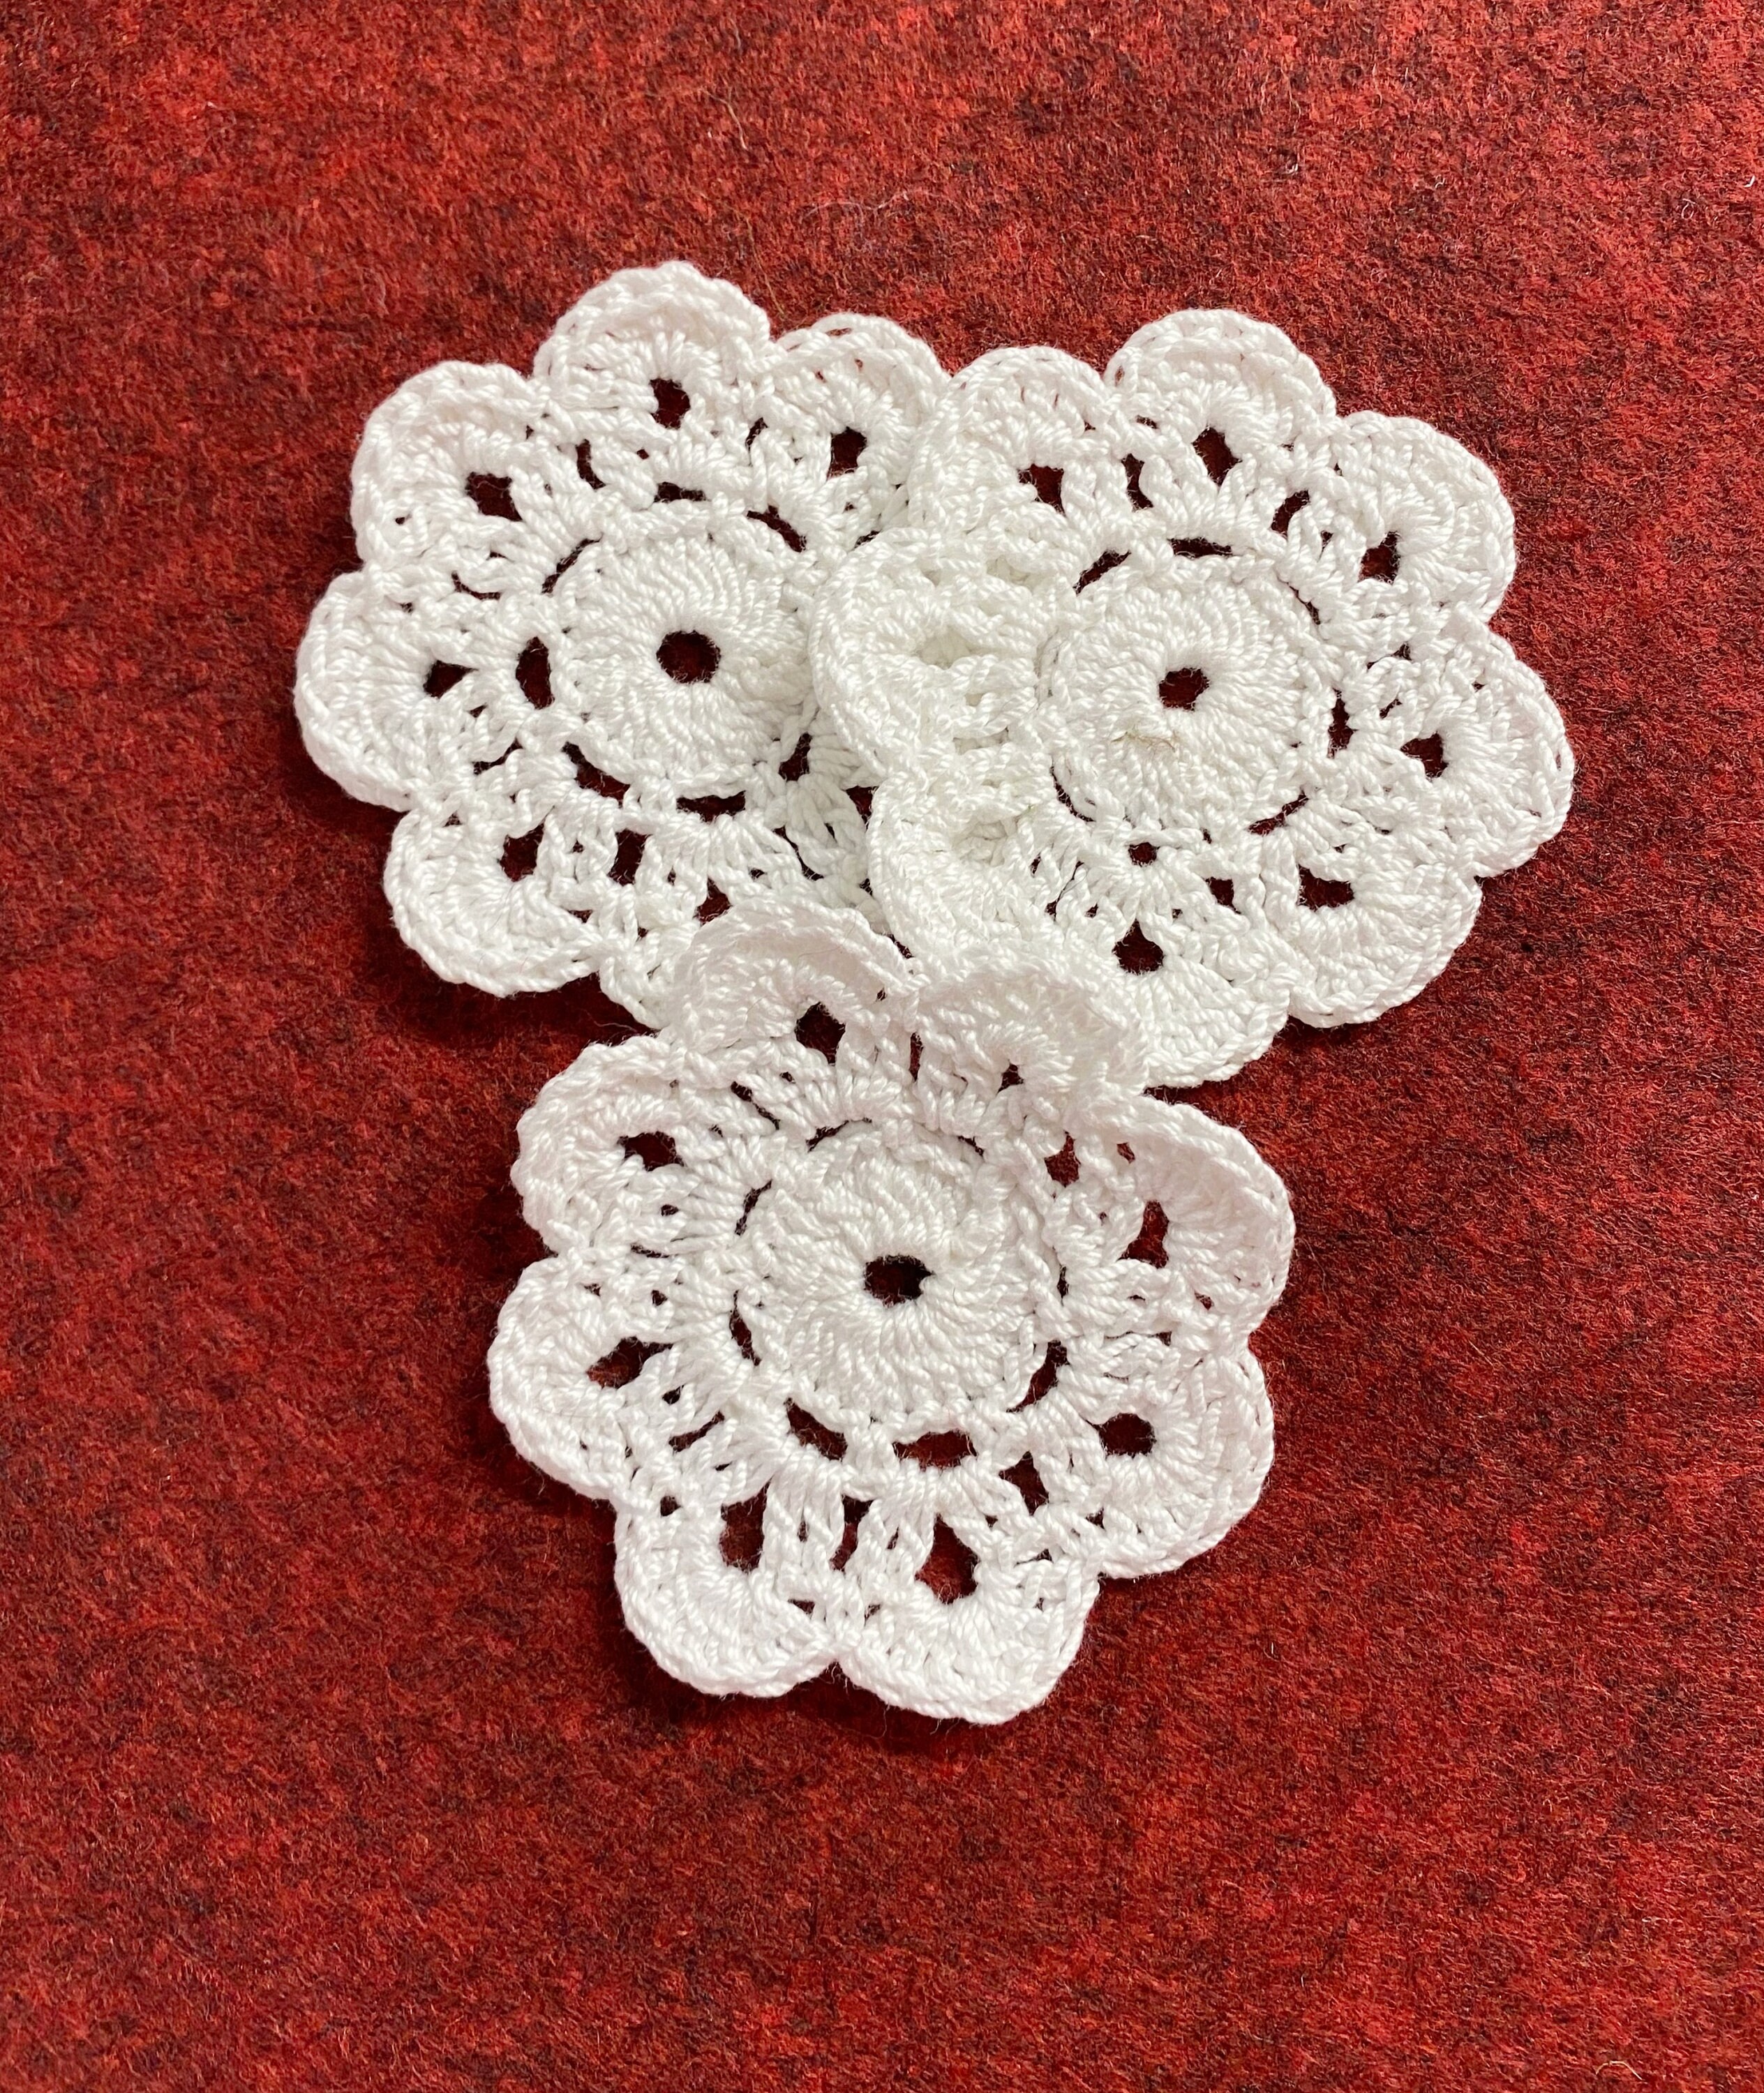  Royal Lace Fine Quality Paper Products, Medallion Lace Round Paper  Doilies, 4-Inch, White, 1 Piece, Pack Of 40 Each